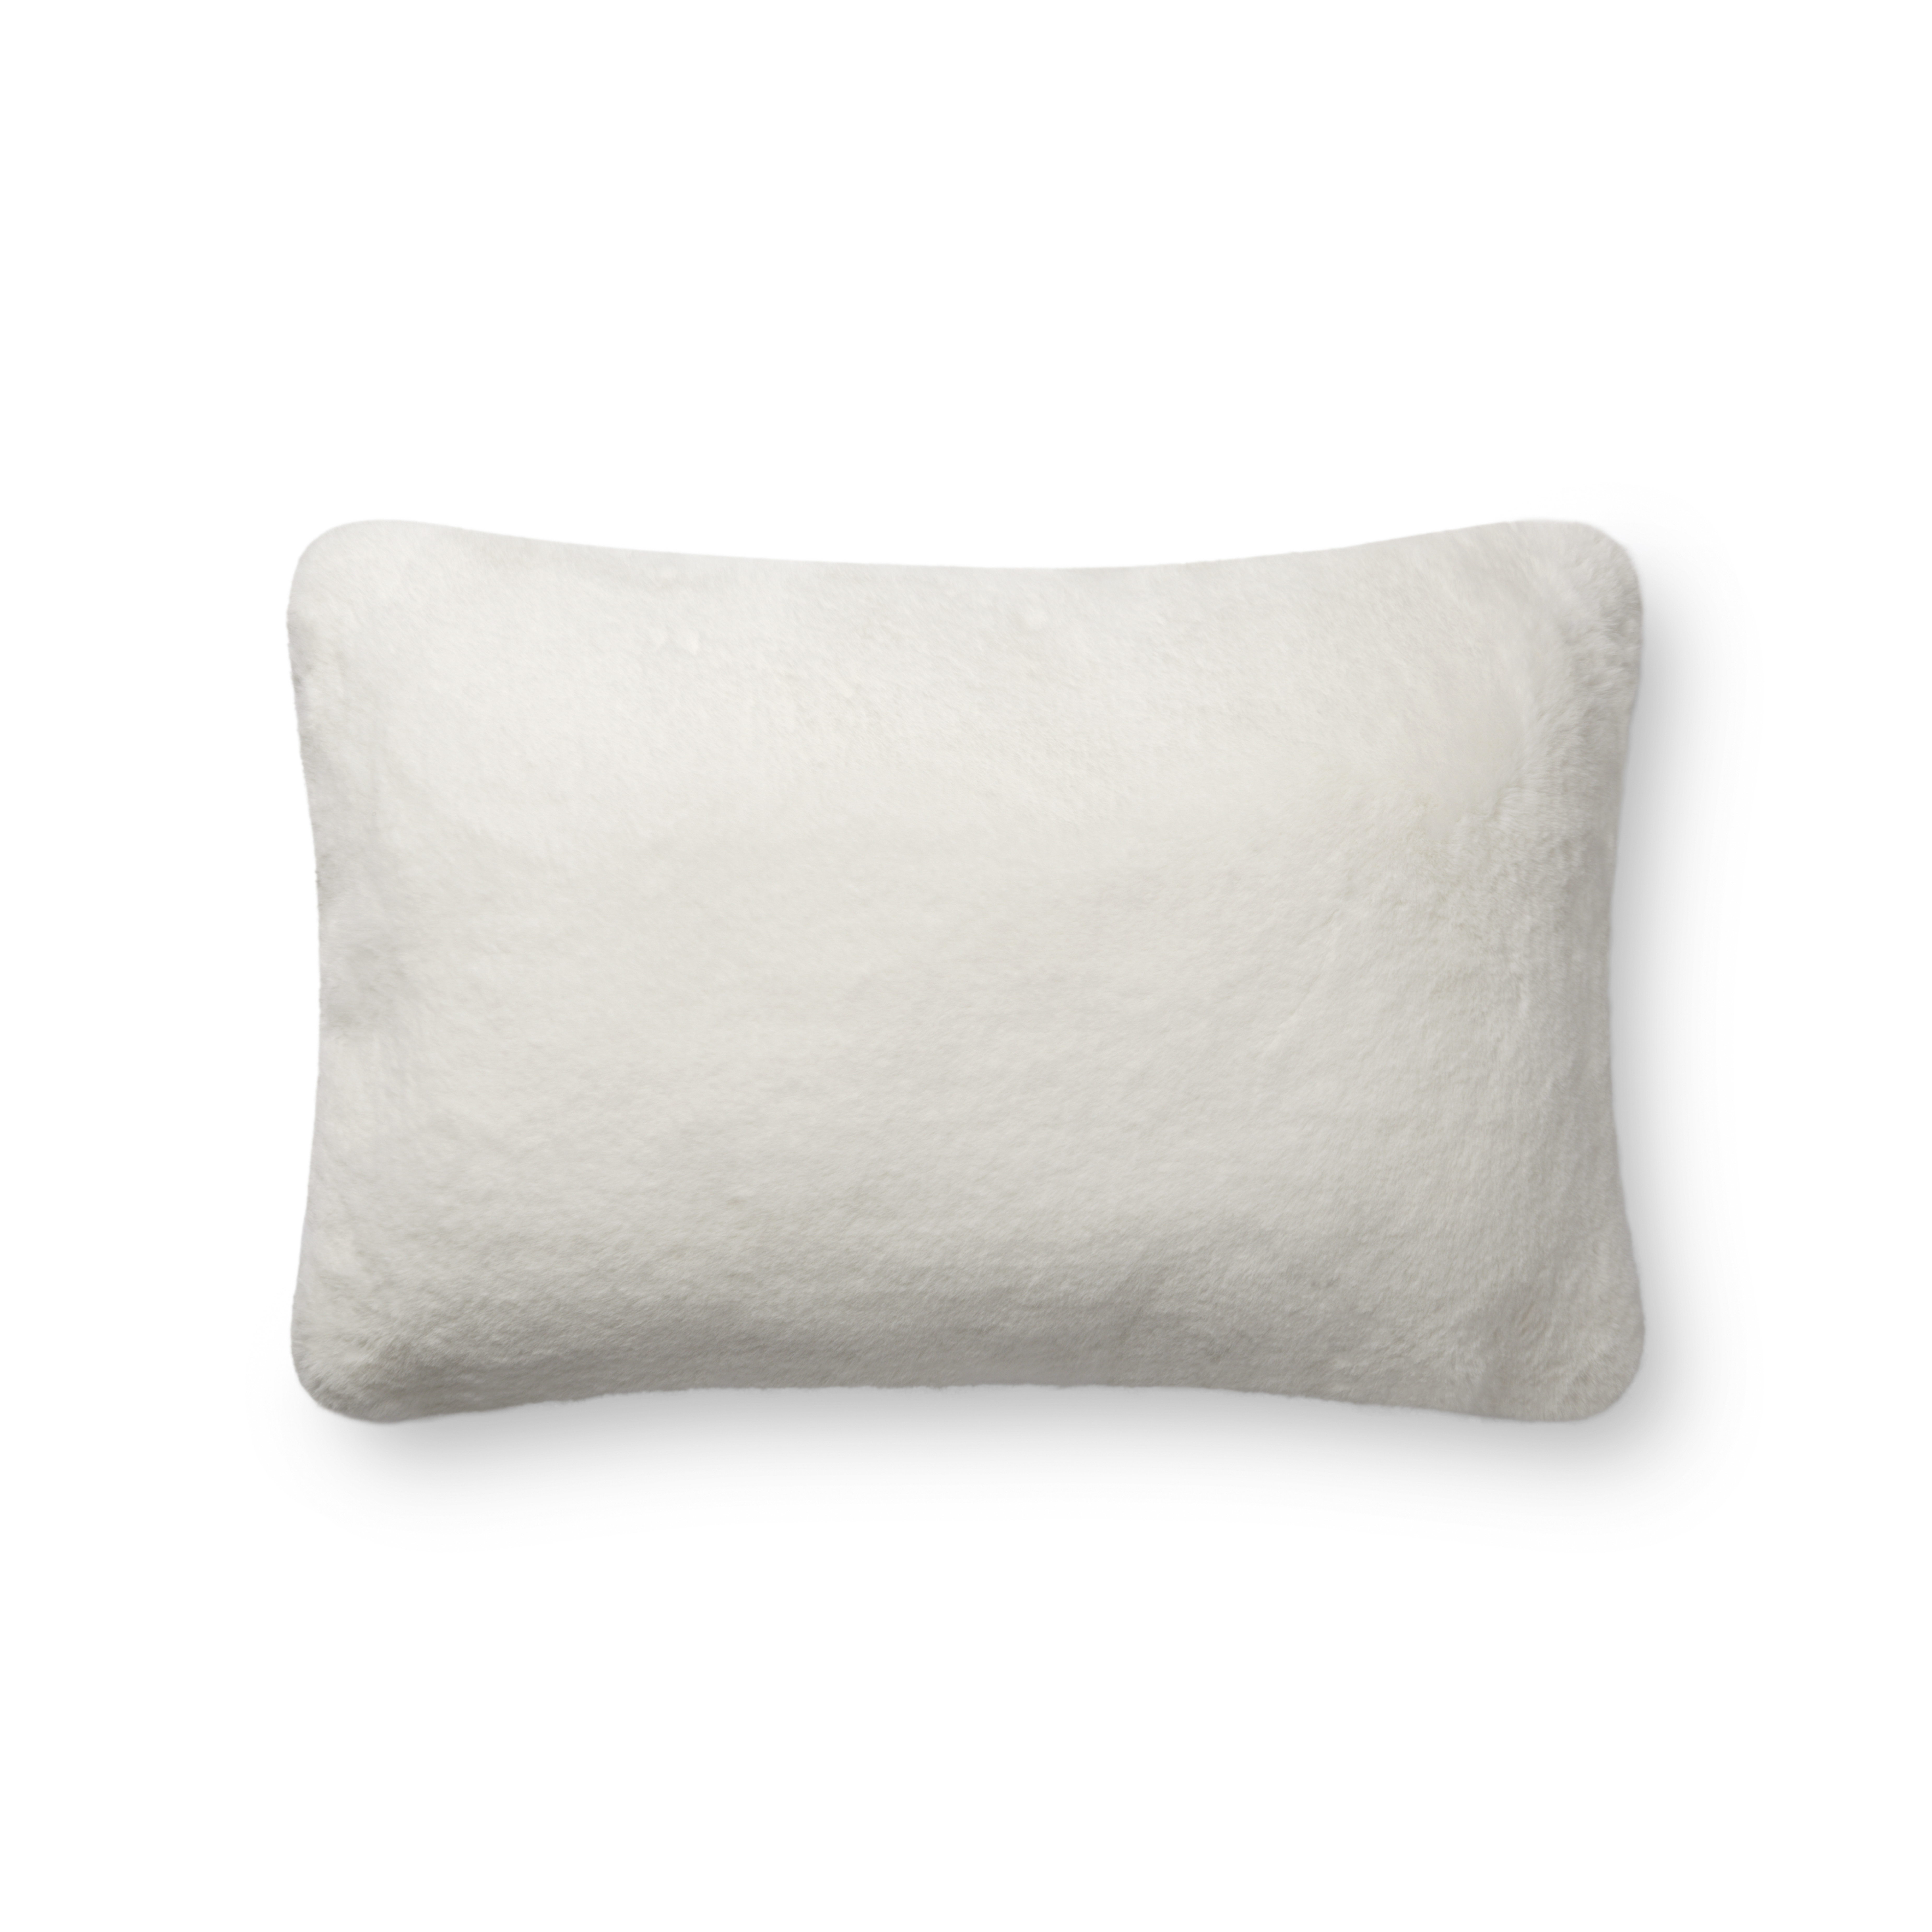 Loloi Pillows P0710 White 22" x 22" Cover Only - Loloi Rugs